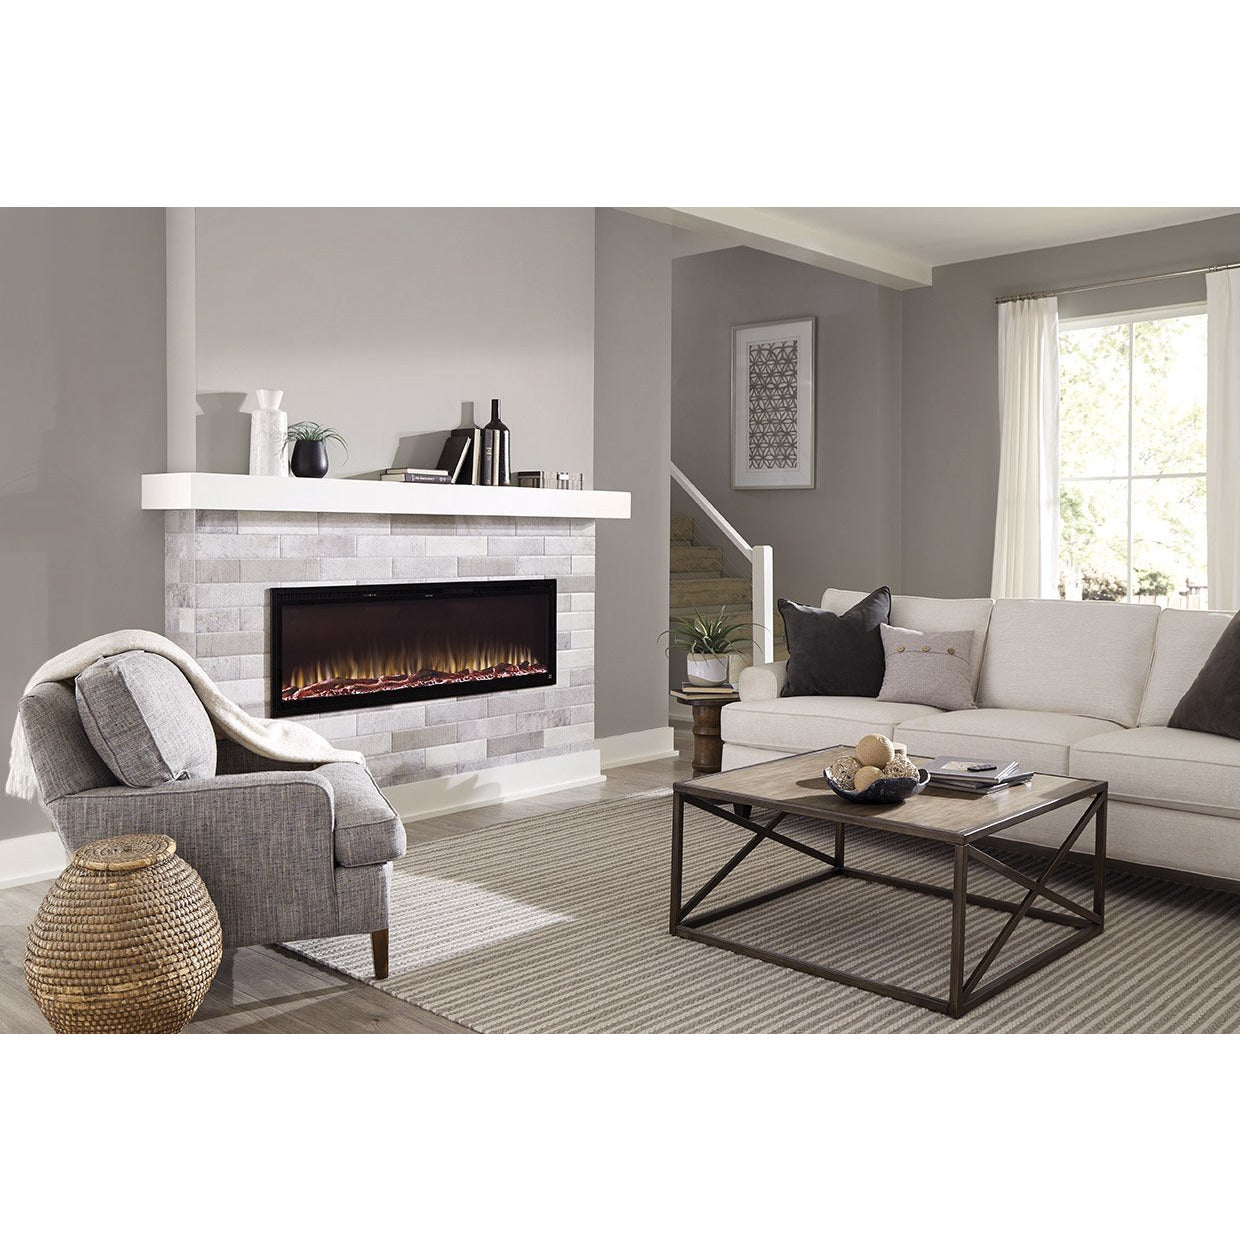 Cozy living room with Sideline Elite 60" Recessed Electric Fireplace with green flame– Very Good Fireplaces.